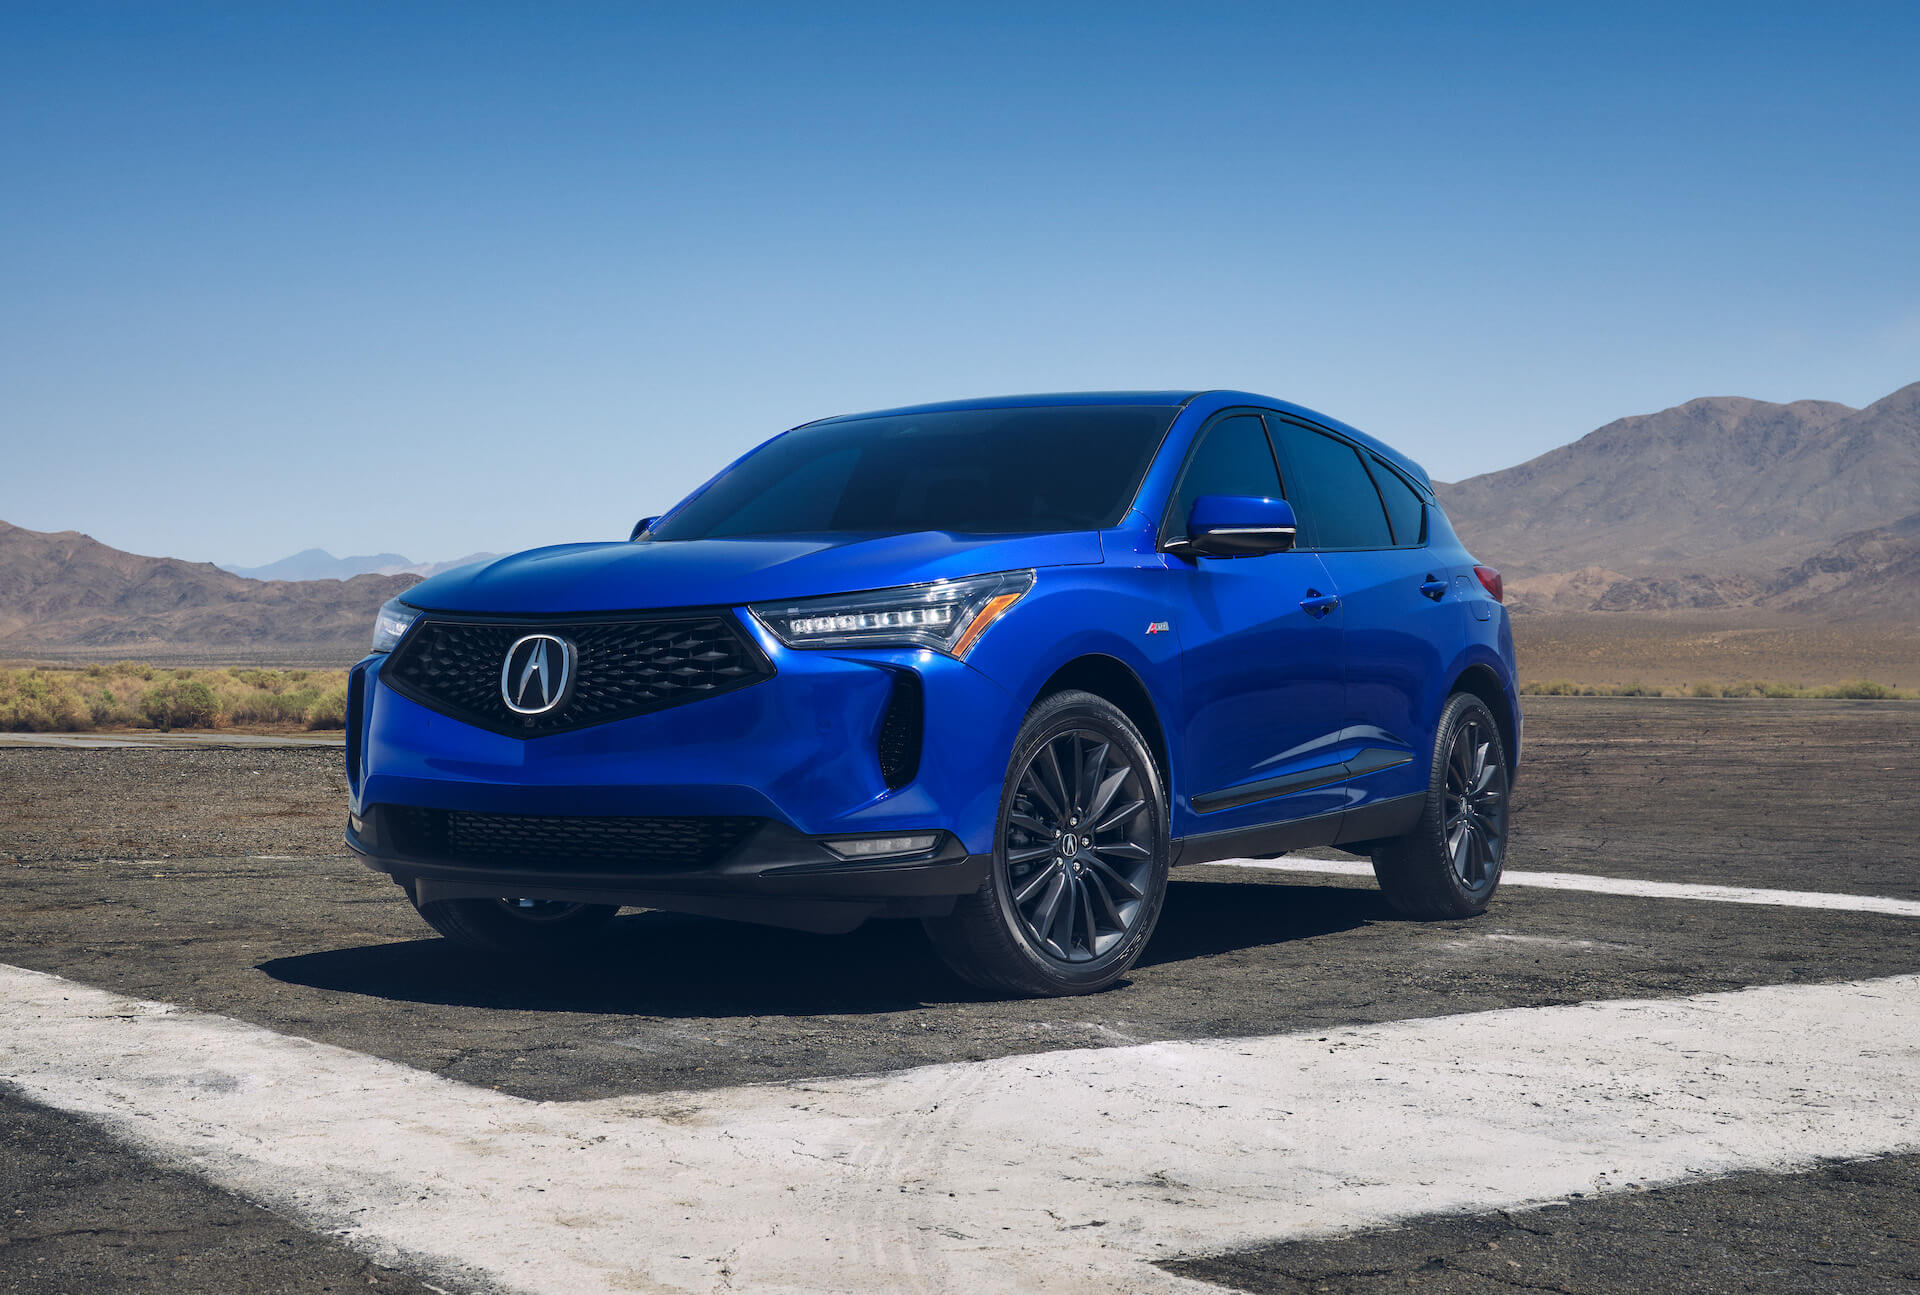 2023 Acura RDX Buyer's Guide: Review And Specs